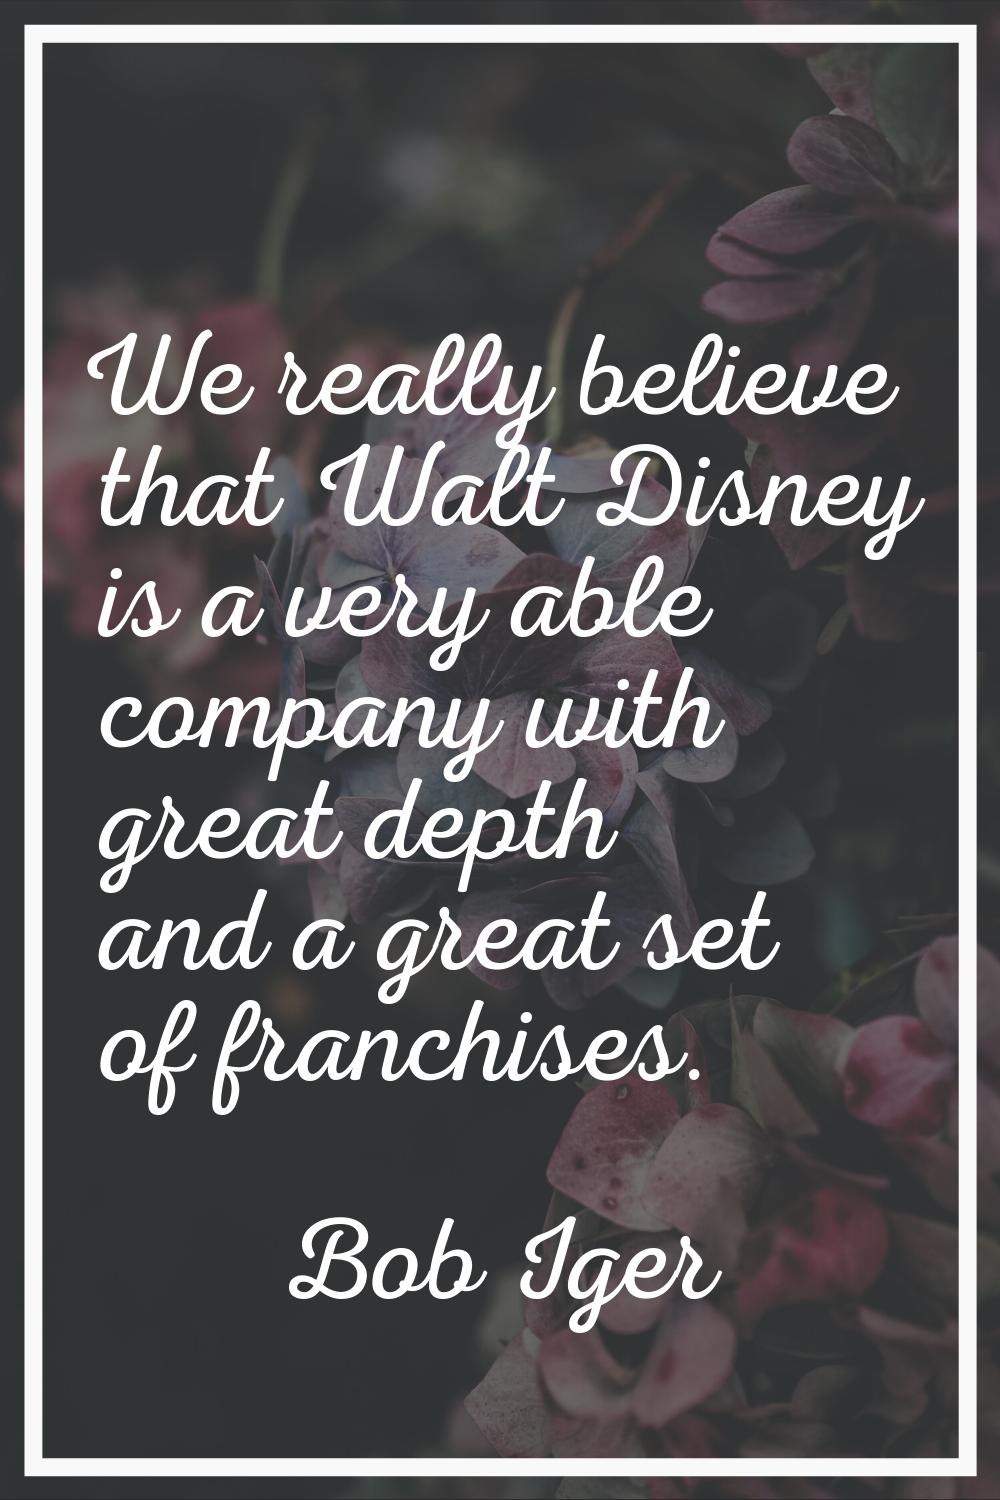 We really believe that Walt Disney is a very able company with great depth and a great set of franc